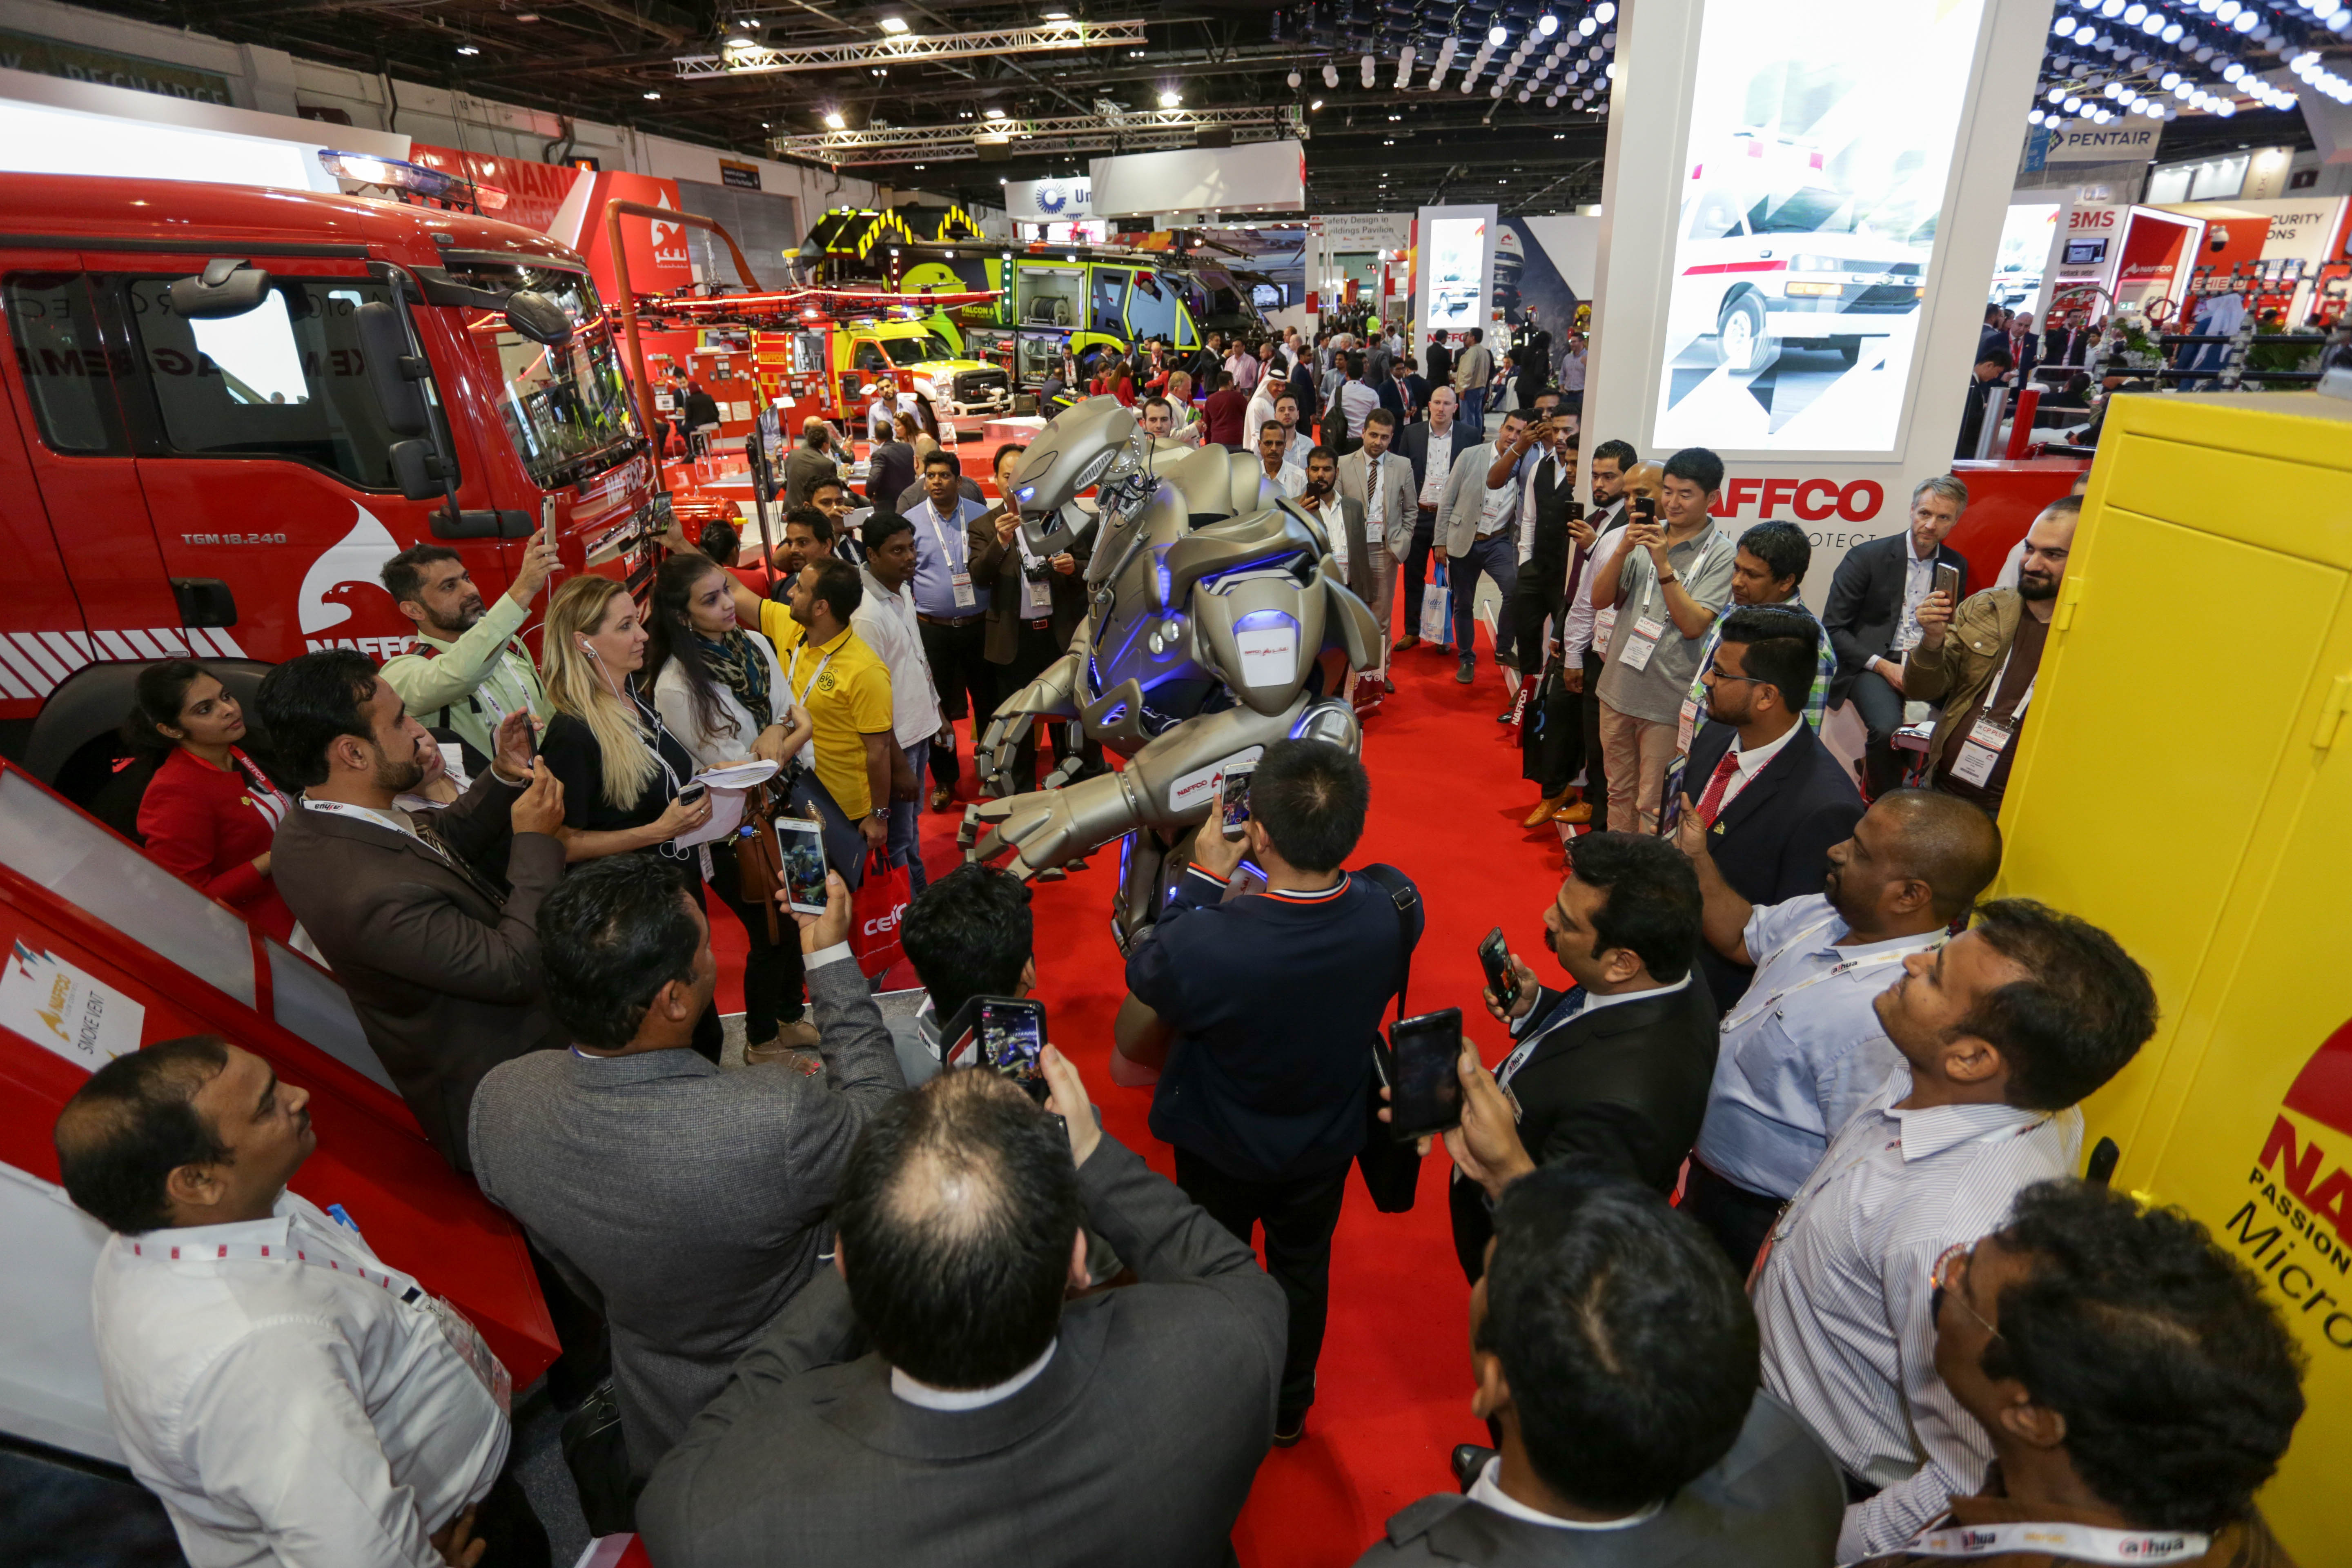 International visitors marvel at the latest technology to be seen at Intersec Dubai in January 2018